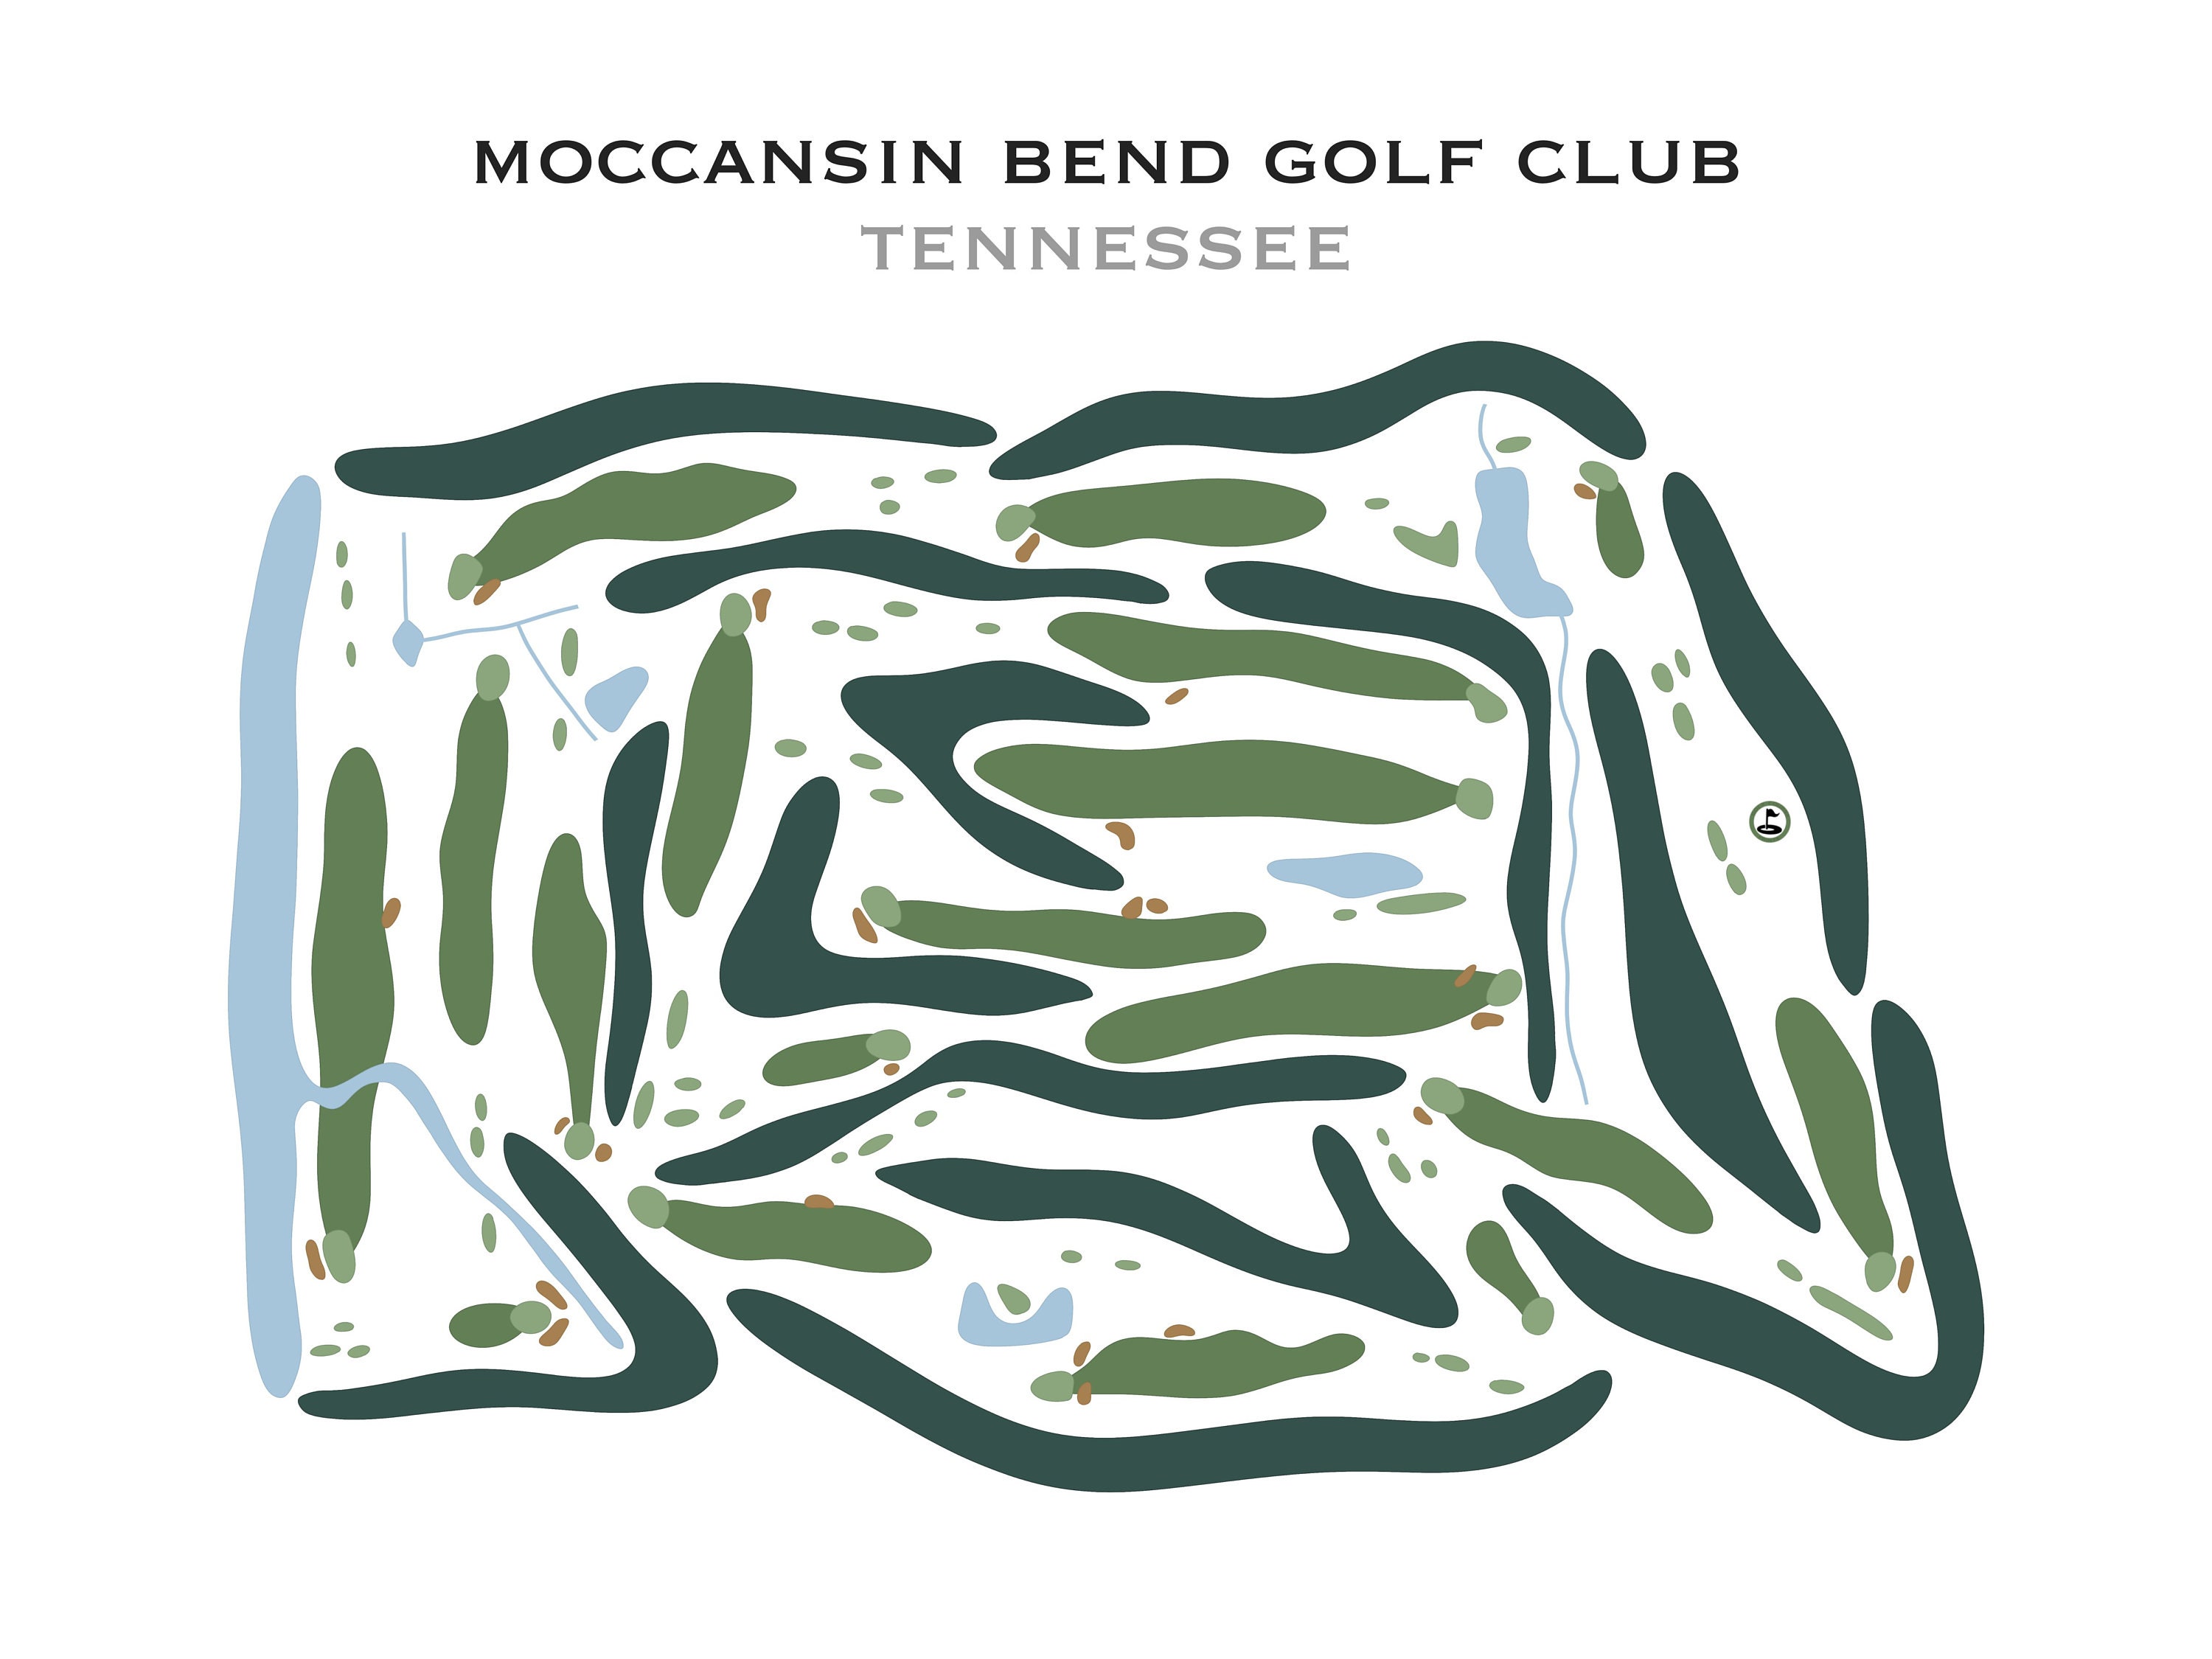 Moccasin Bend Golf Club Tennessee Golf Course Map Golf photo